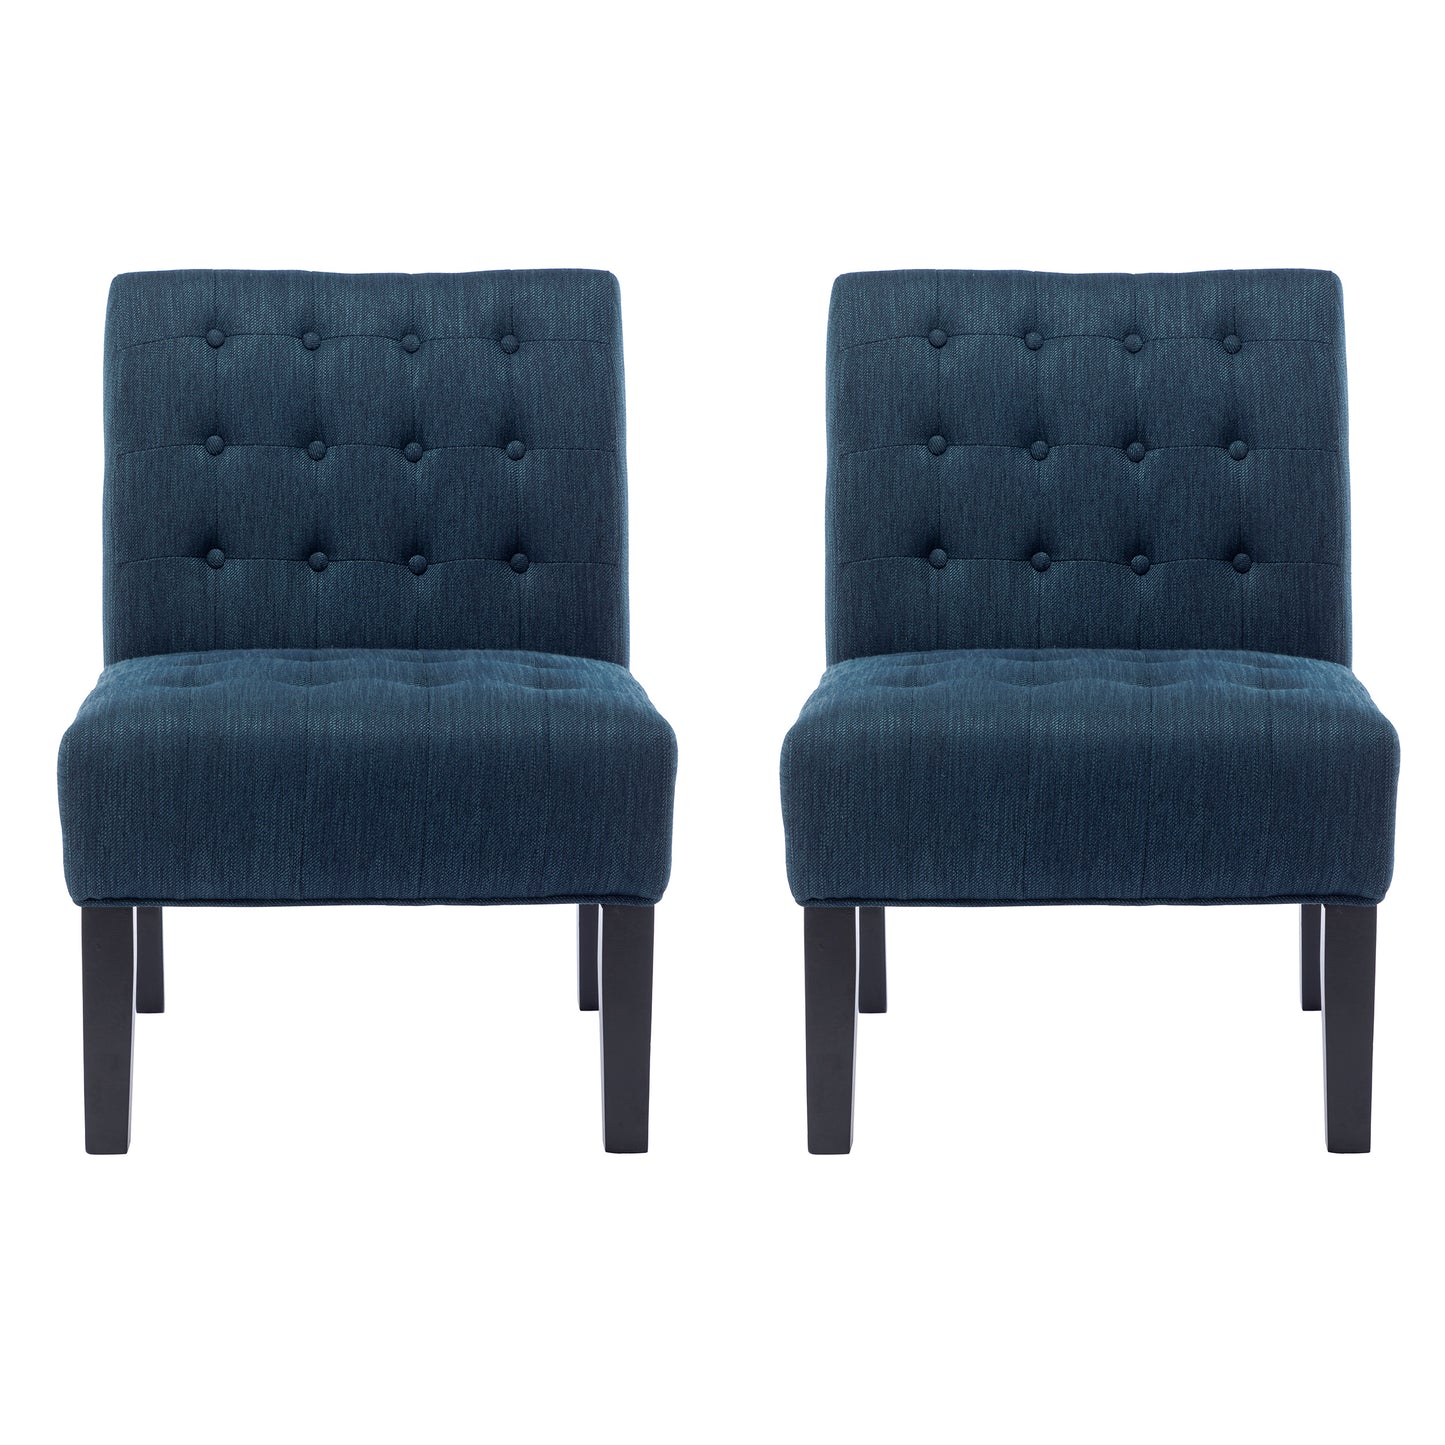 Mulligan Contemporary Fabric Tufted Slipper Chairs, Set of 2